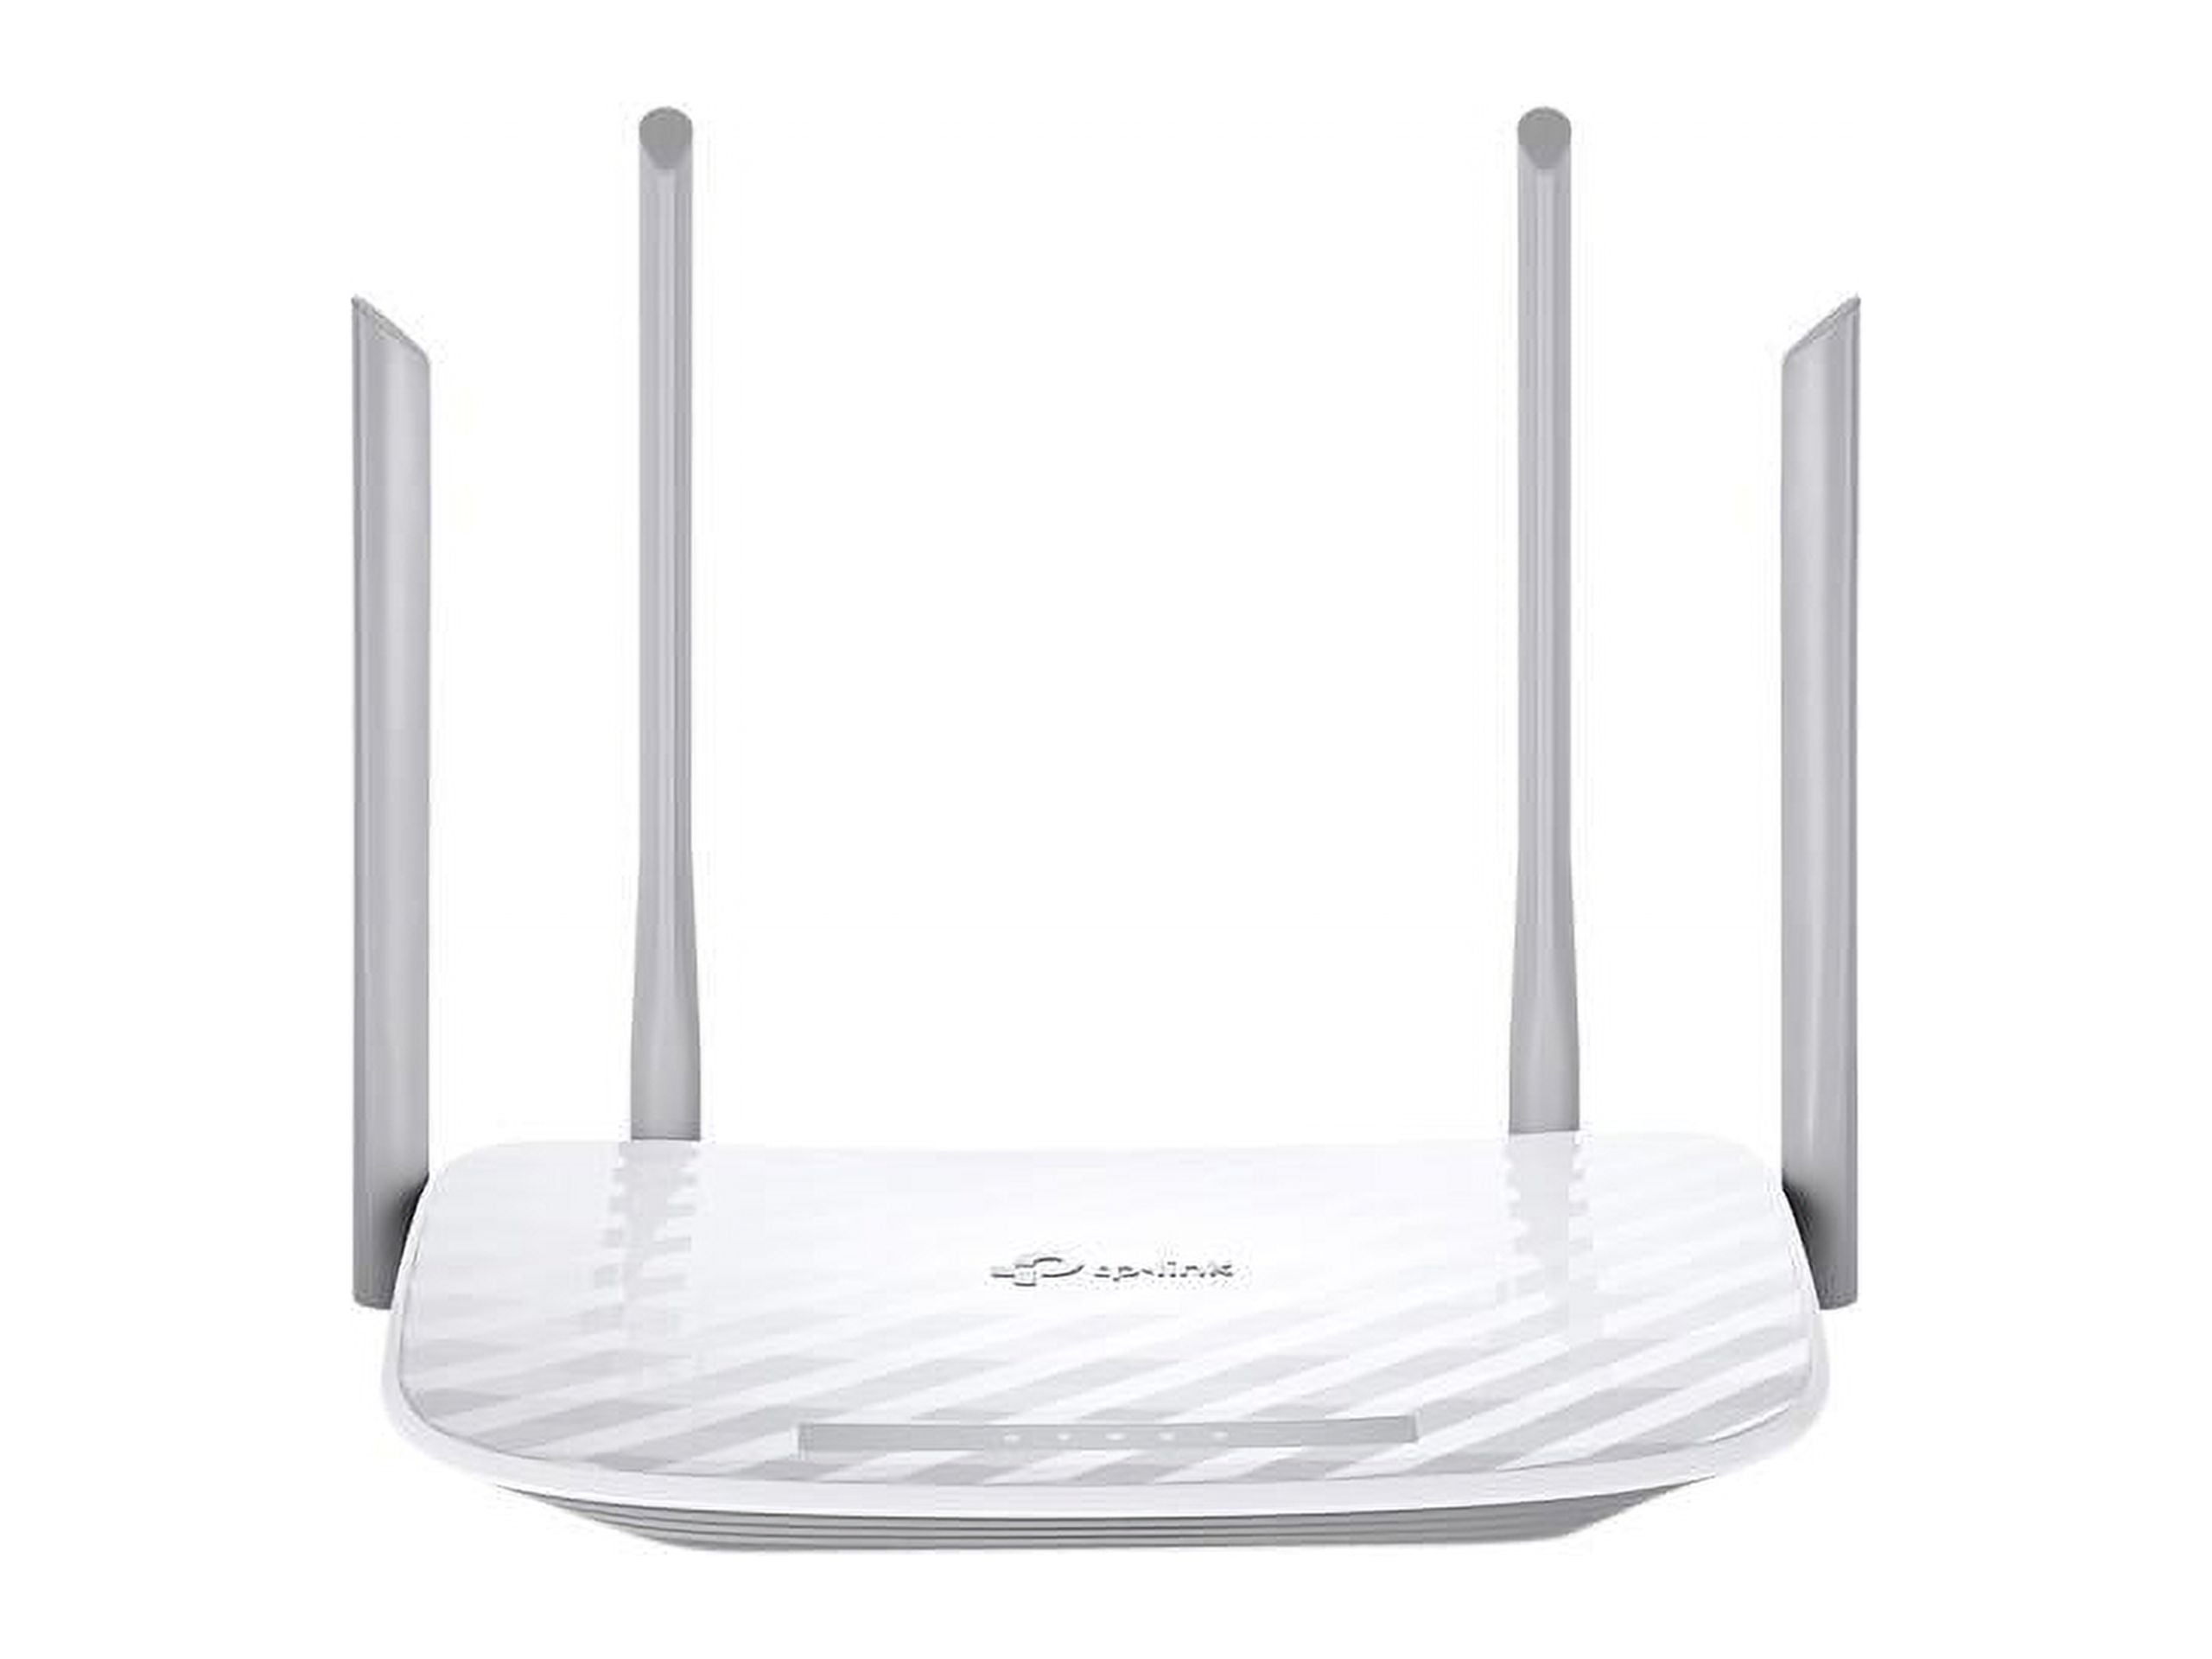 TP-Link AC1200 WiFi Router (Archer A54) - Dual Band Wireless Internet Router,  4 x 10/100 Mbps Fast Ethernet Ports, Supports Guest WiFi, Access Point  Mode, IPv6 and Parental Controls 